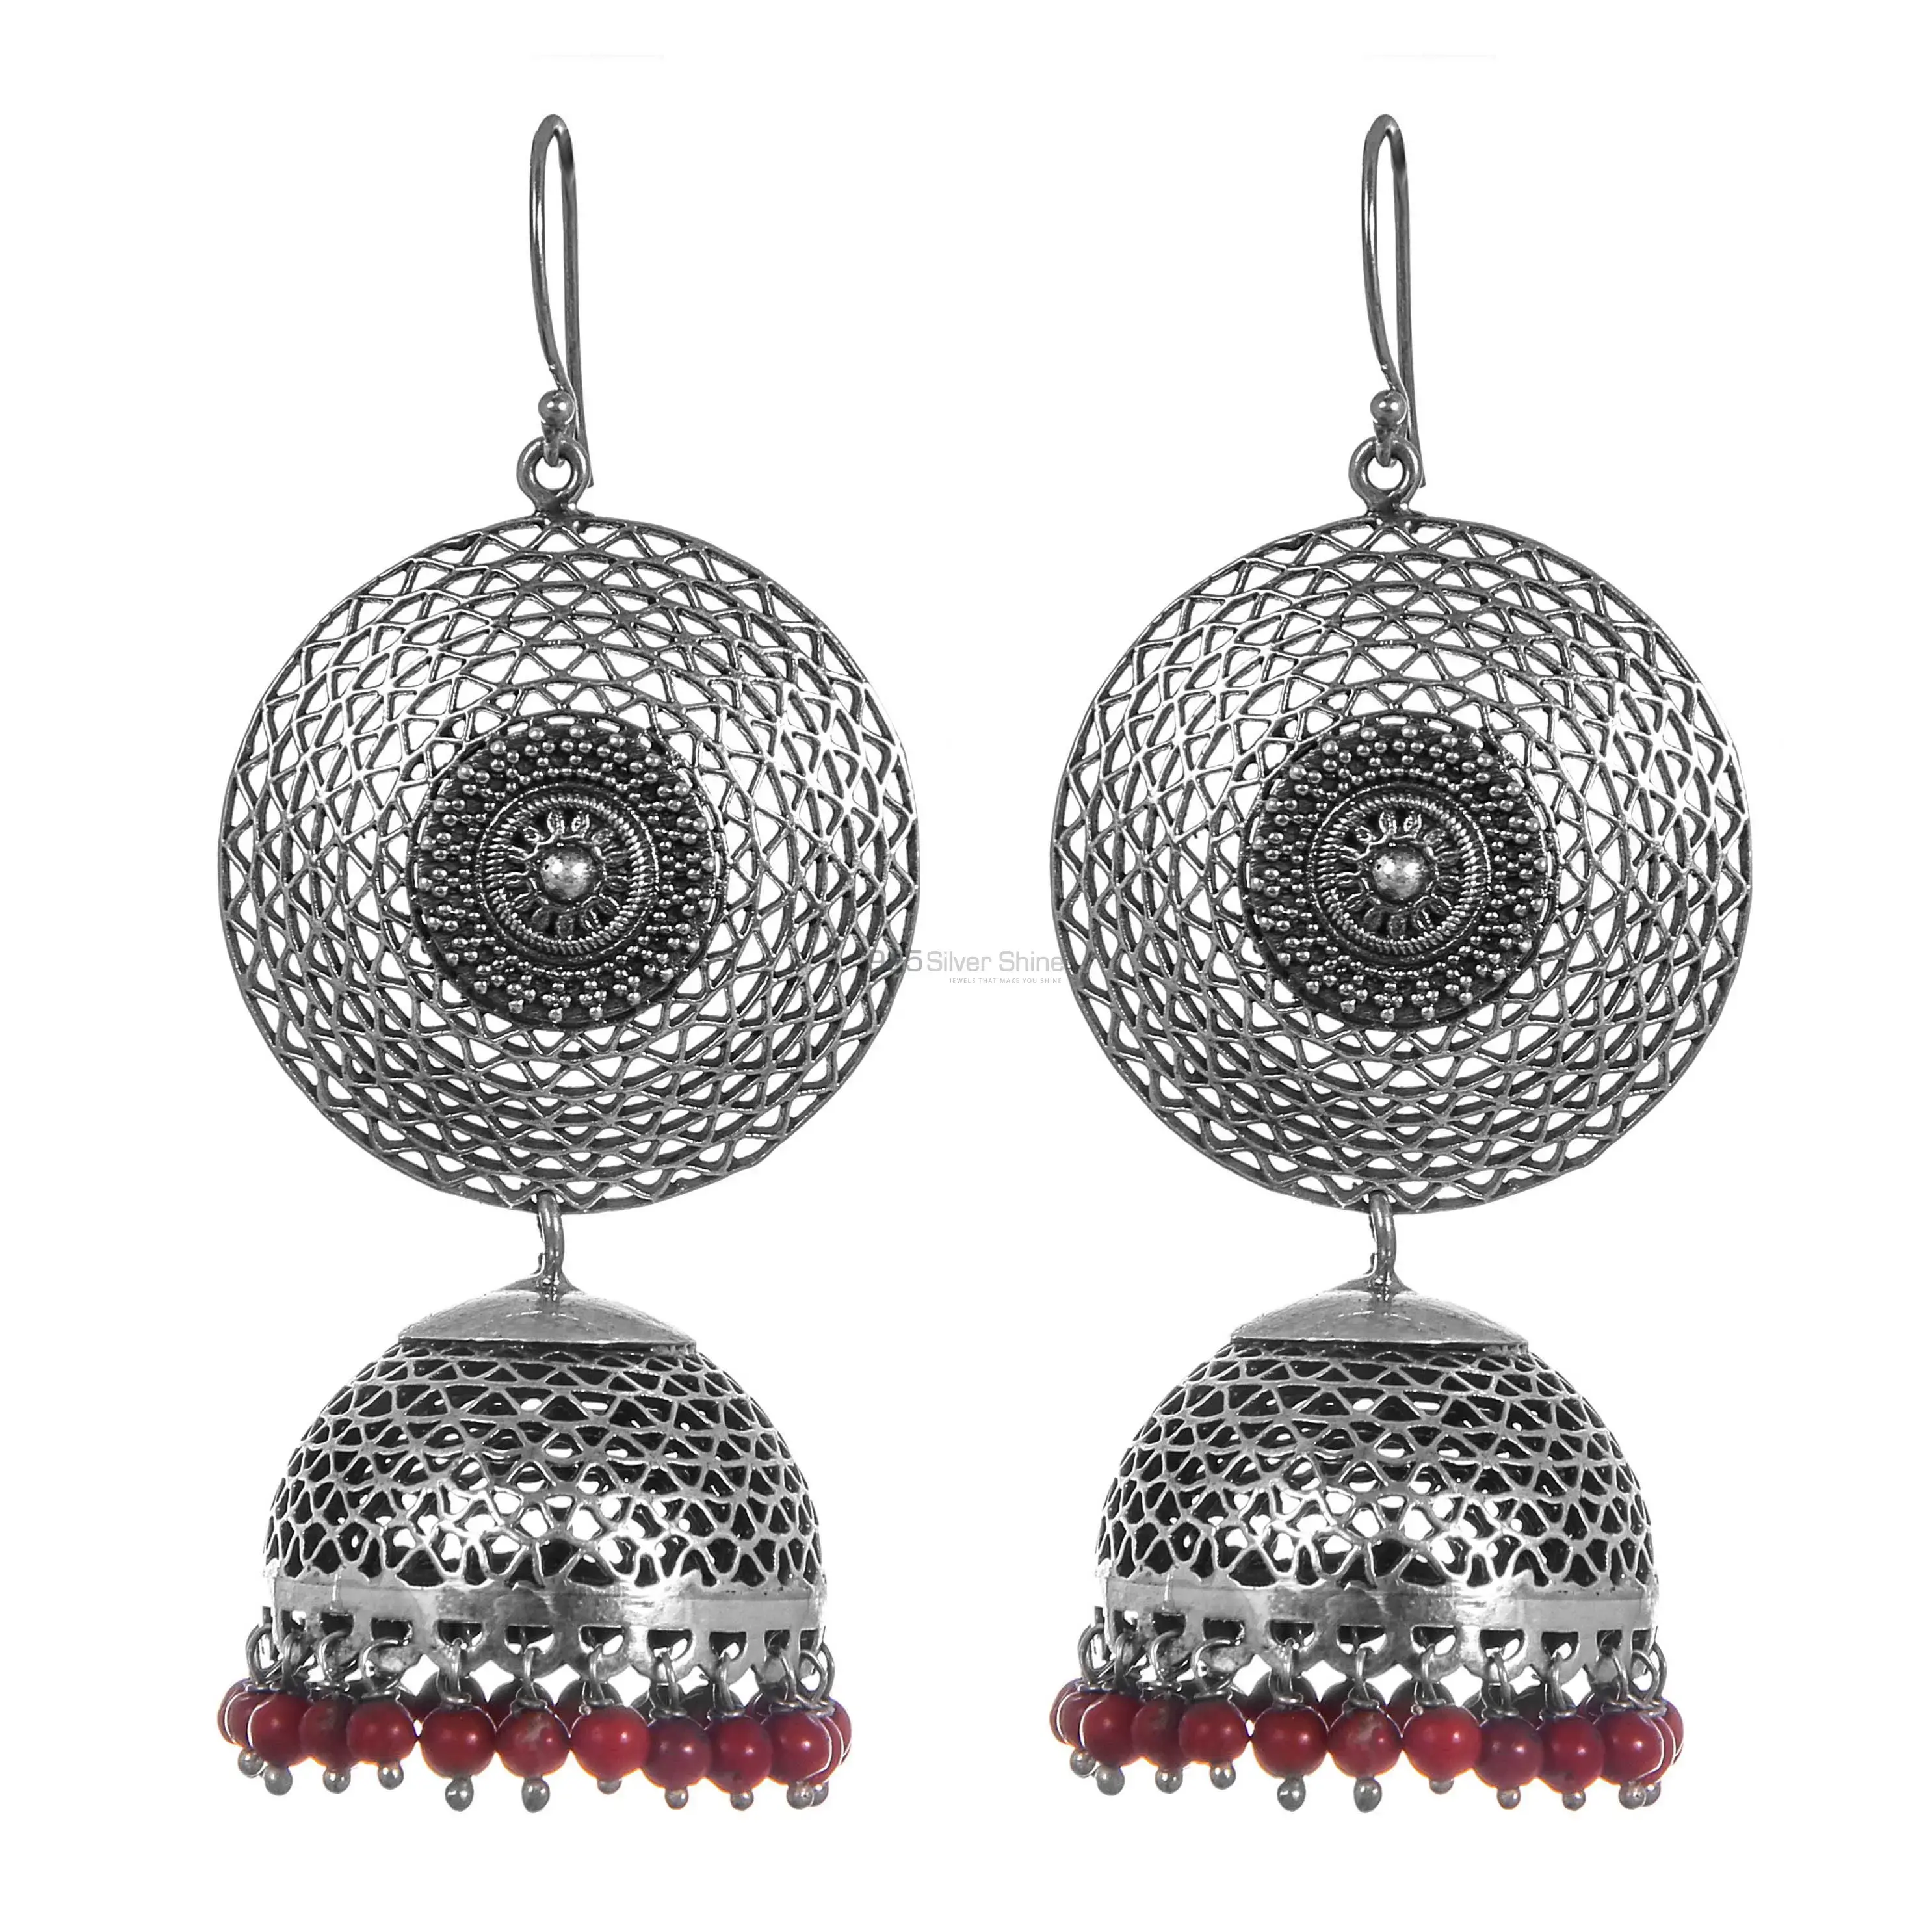 Page 10 of Earrings for Women : Latest Earring Designs at Best Price, Meesho